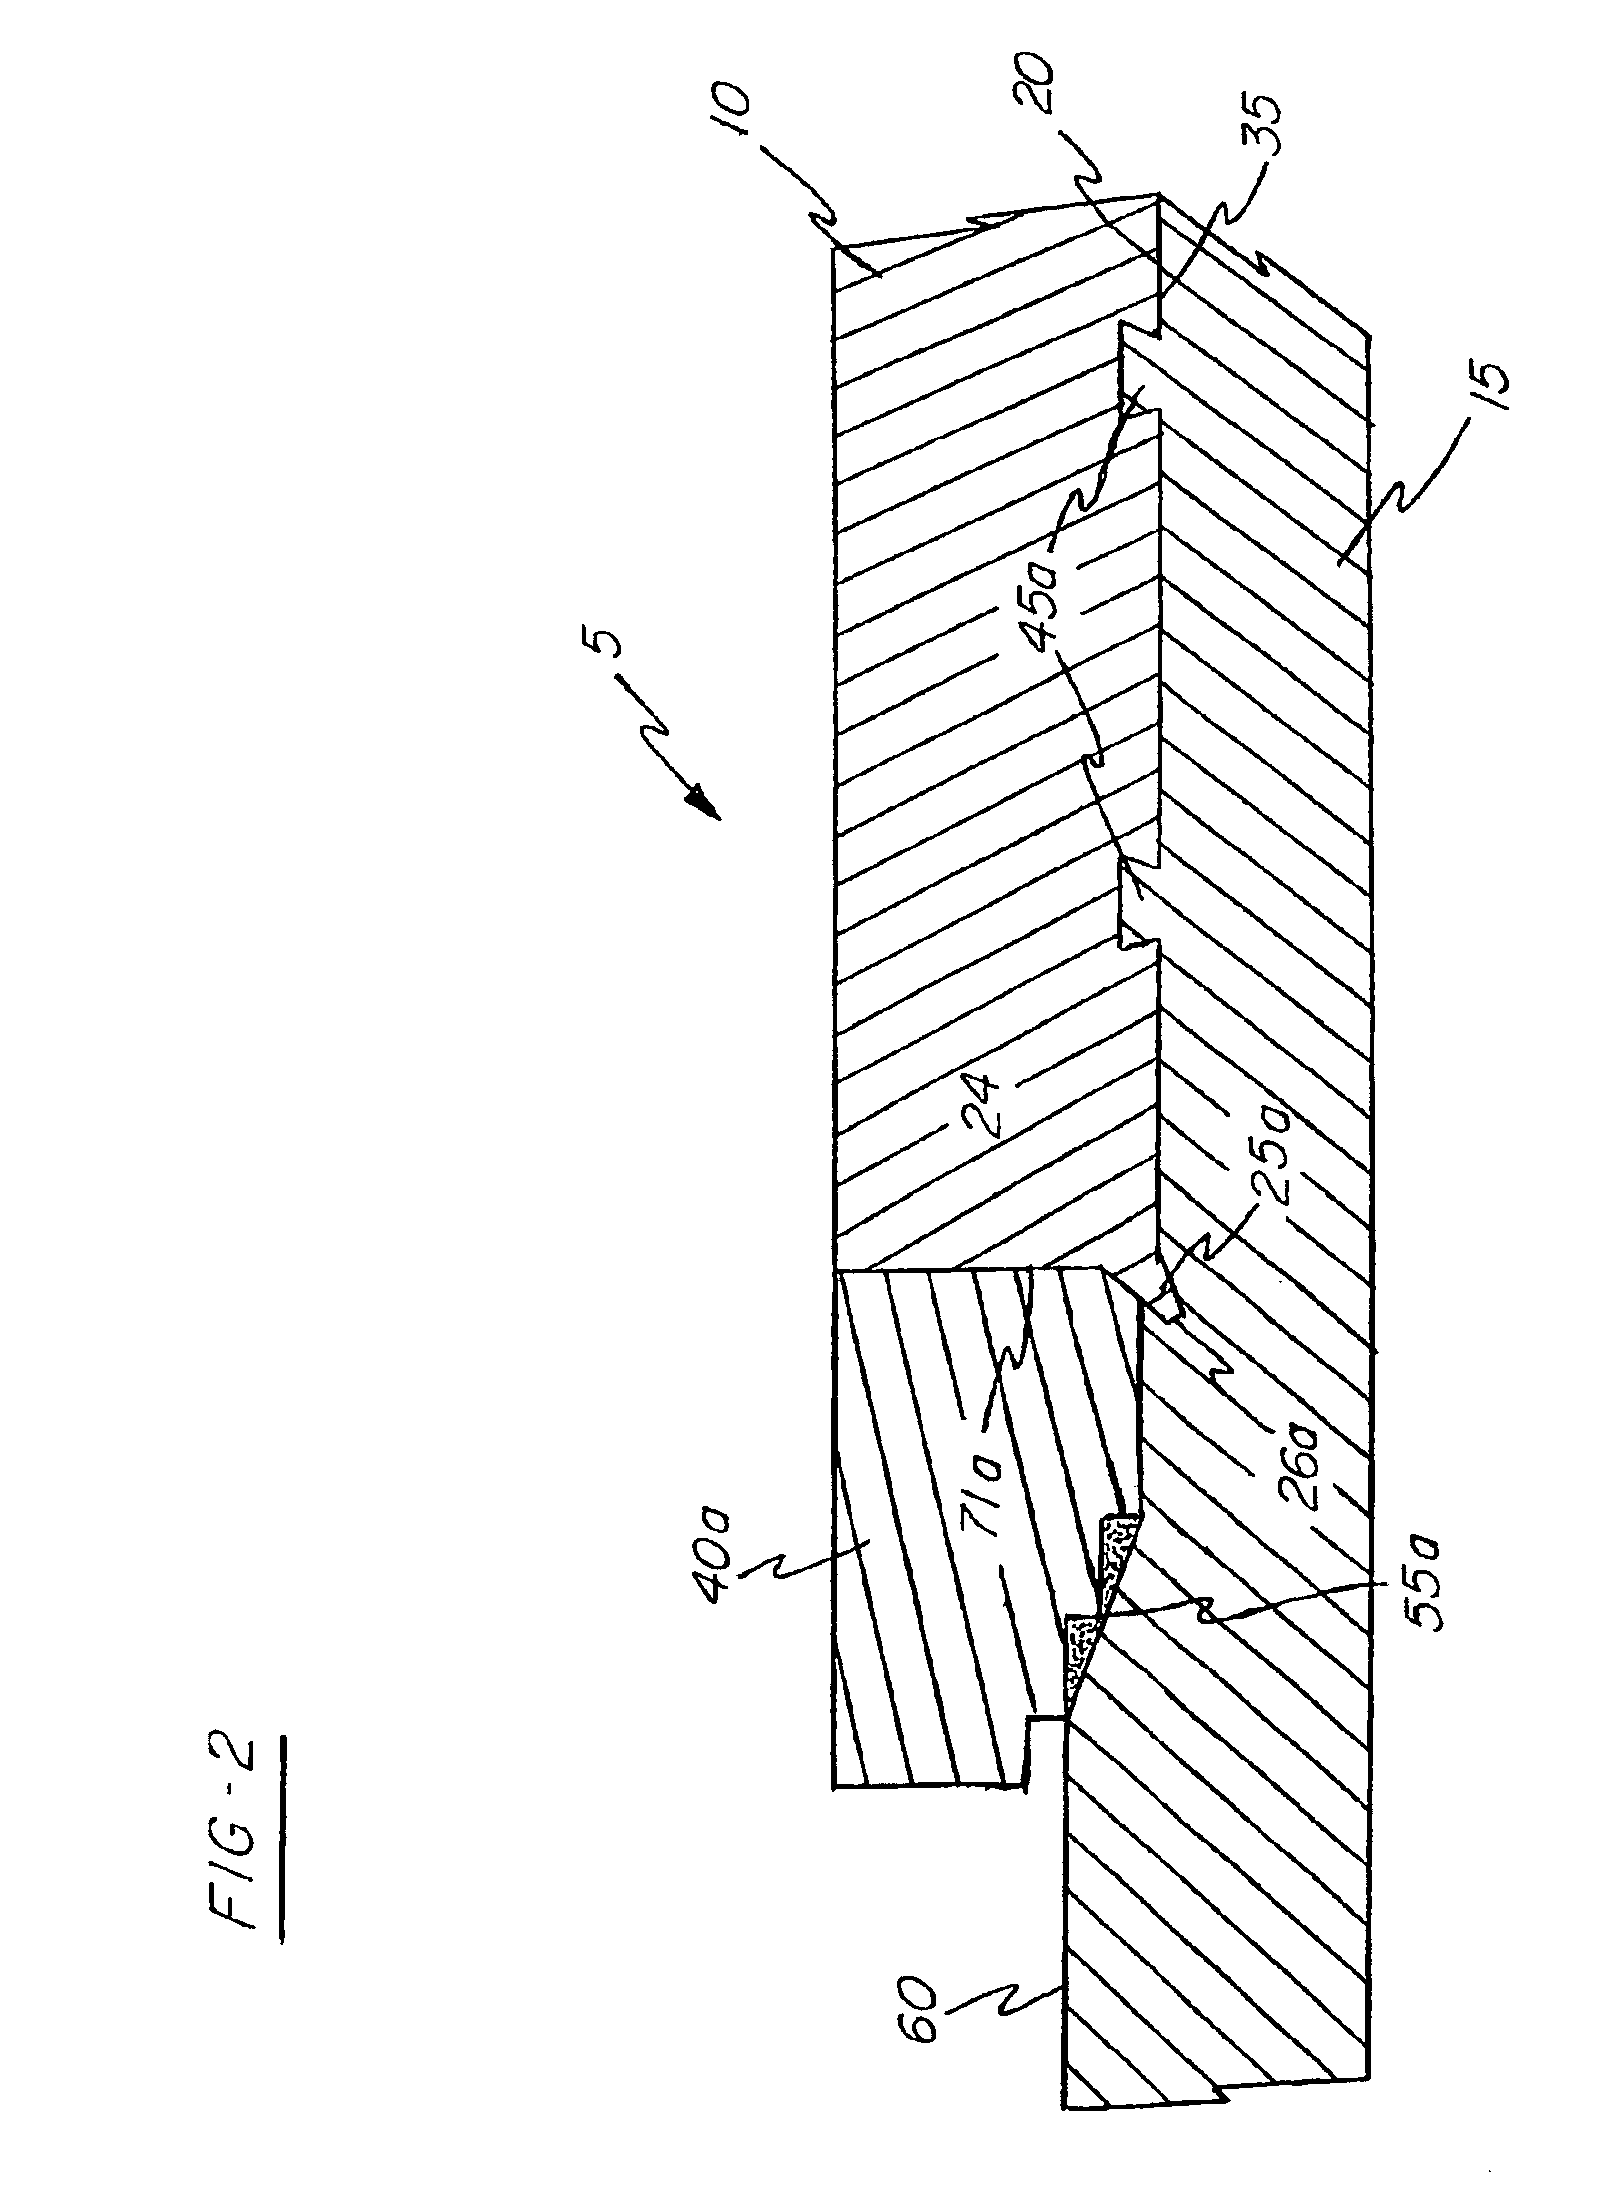 Low temperature sputter target/backing plate method and assembly